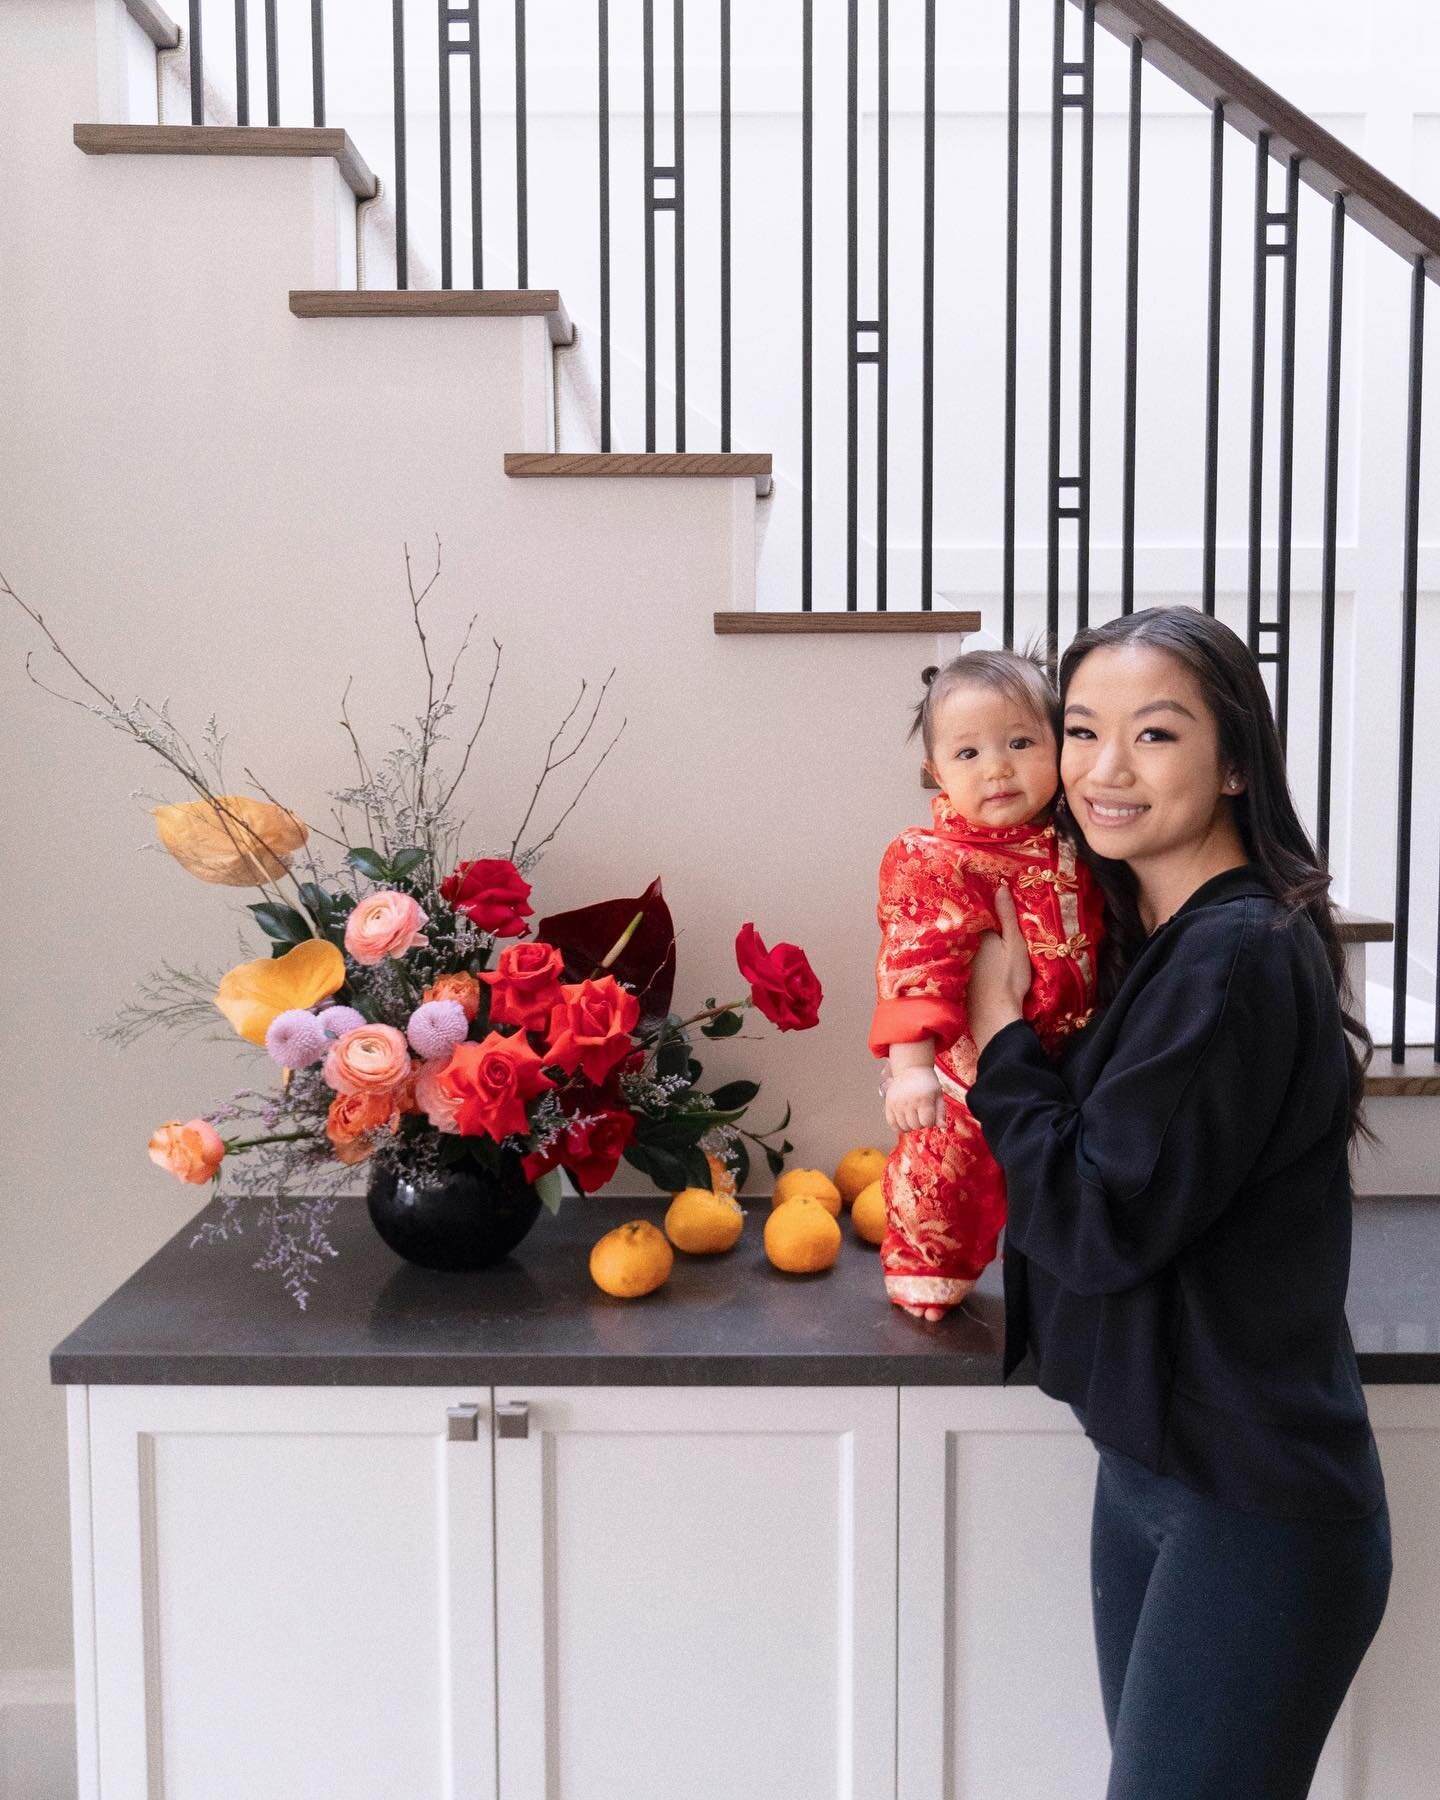 Happy Lunar New Year! 恭喜发财
 
So proud and grateful to start showing Everly our cultural traditions with my Chinese heritage. Hope she&rsquo;s excited for some 🧧🎊🍊🥟🍬🏮! 

#lunarnewyear2021 #cny2021